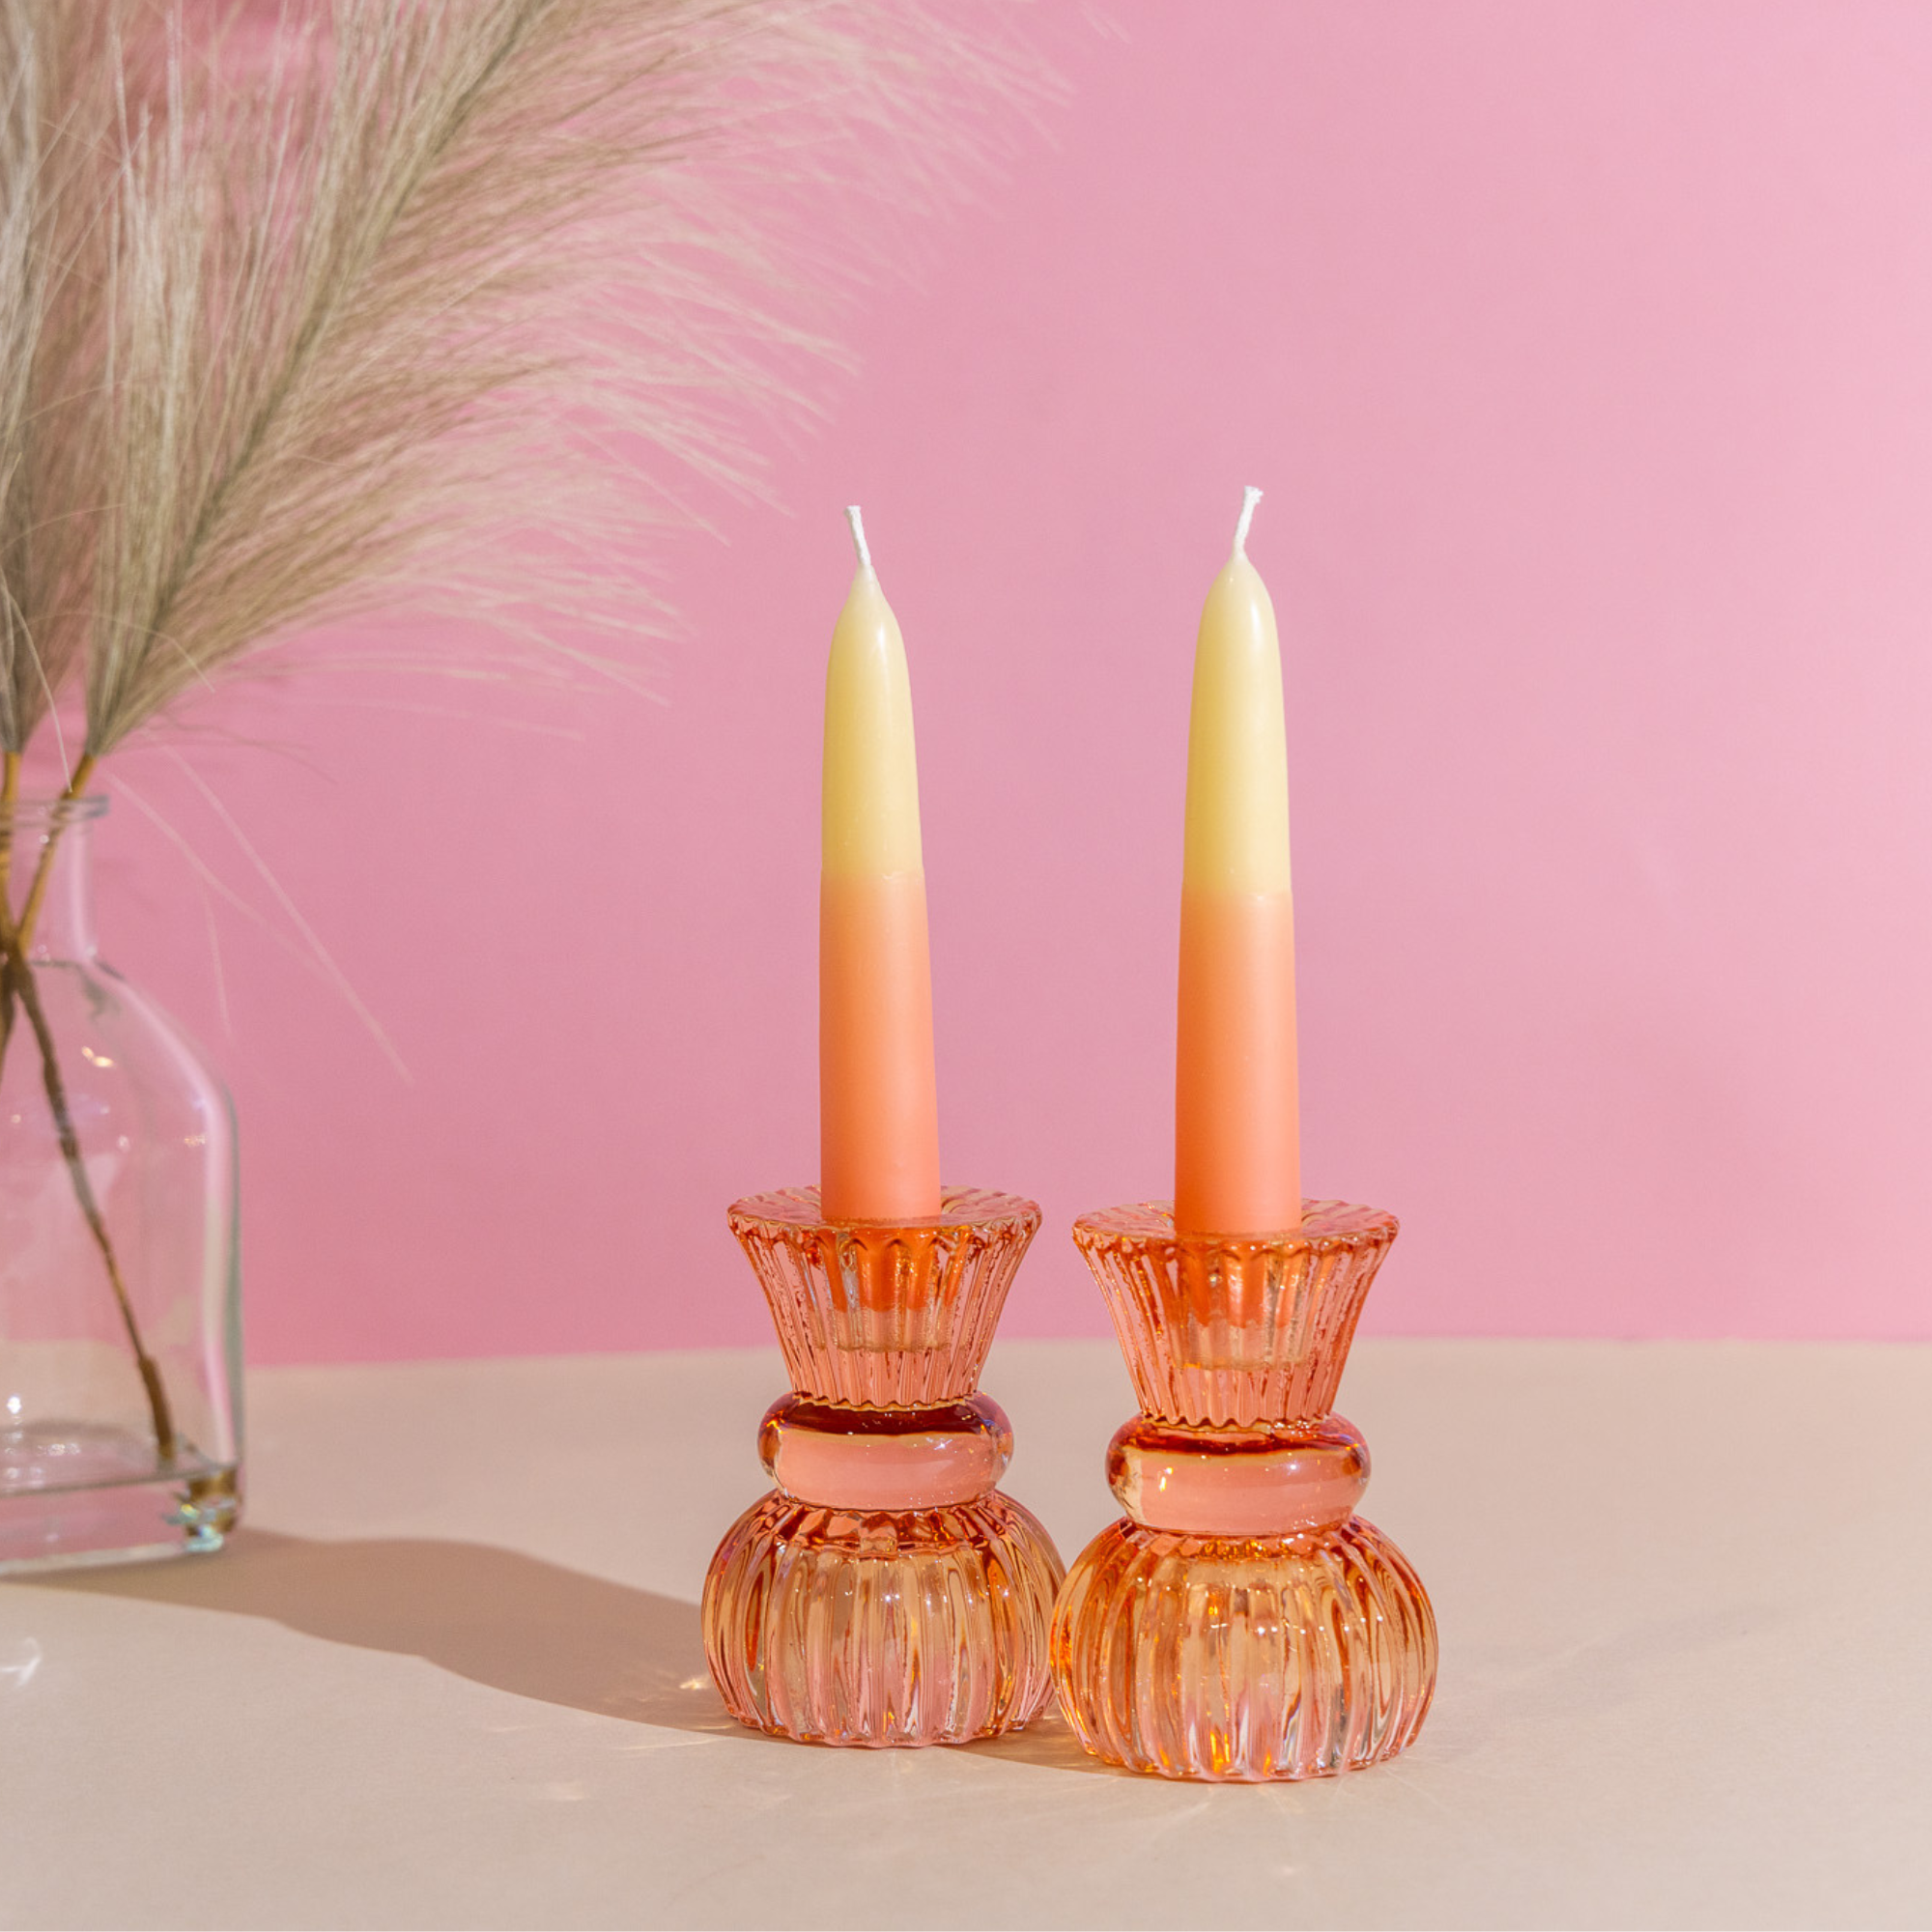 Rose and White Beeswax Taper Candles